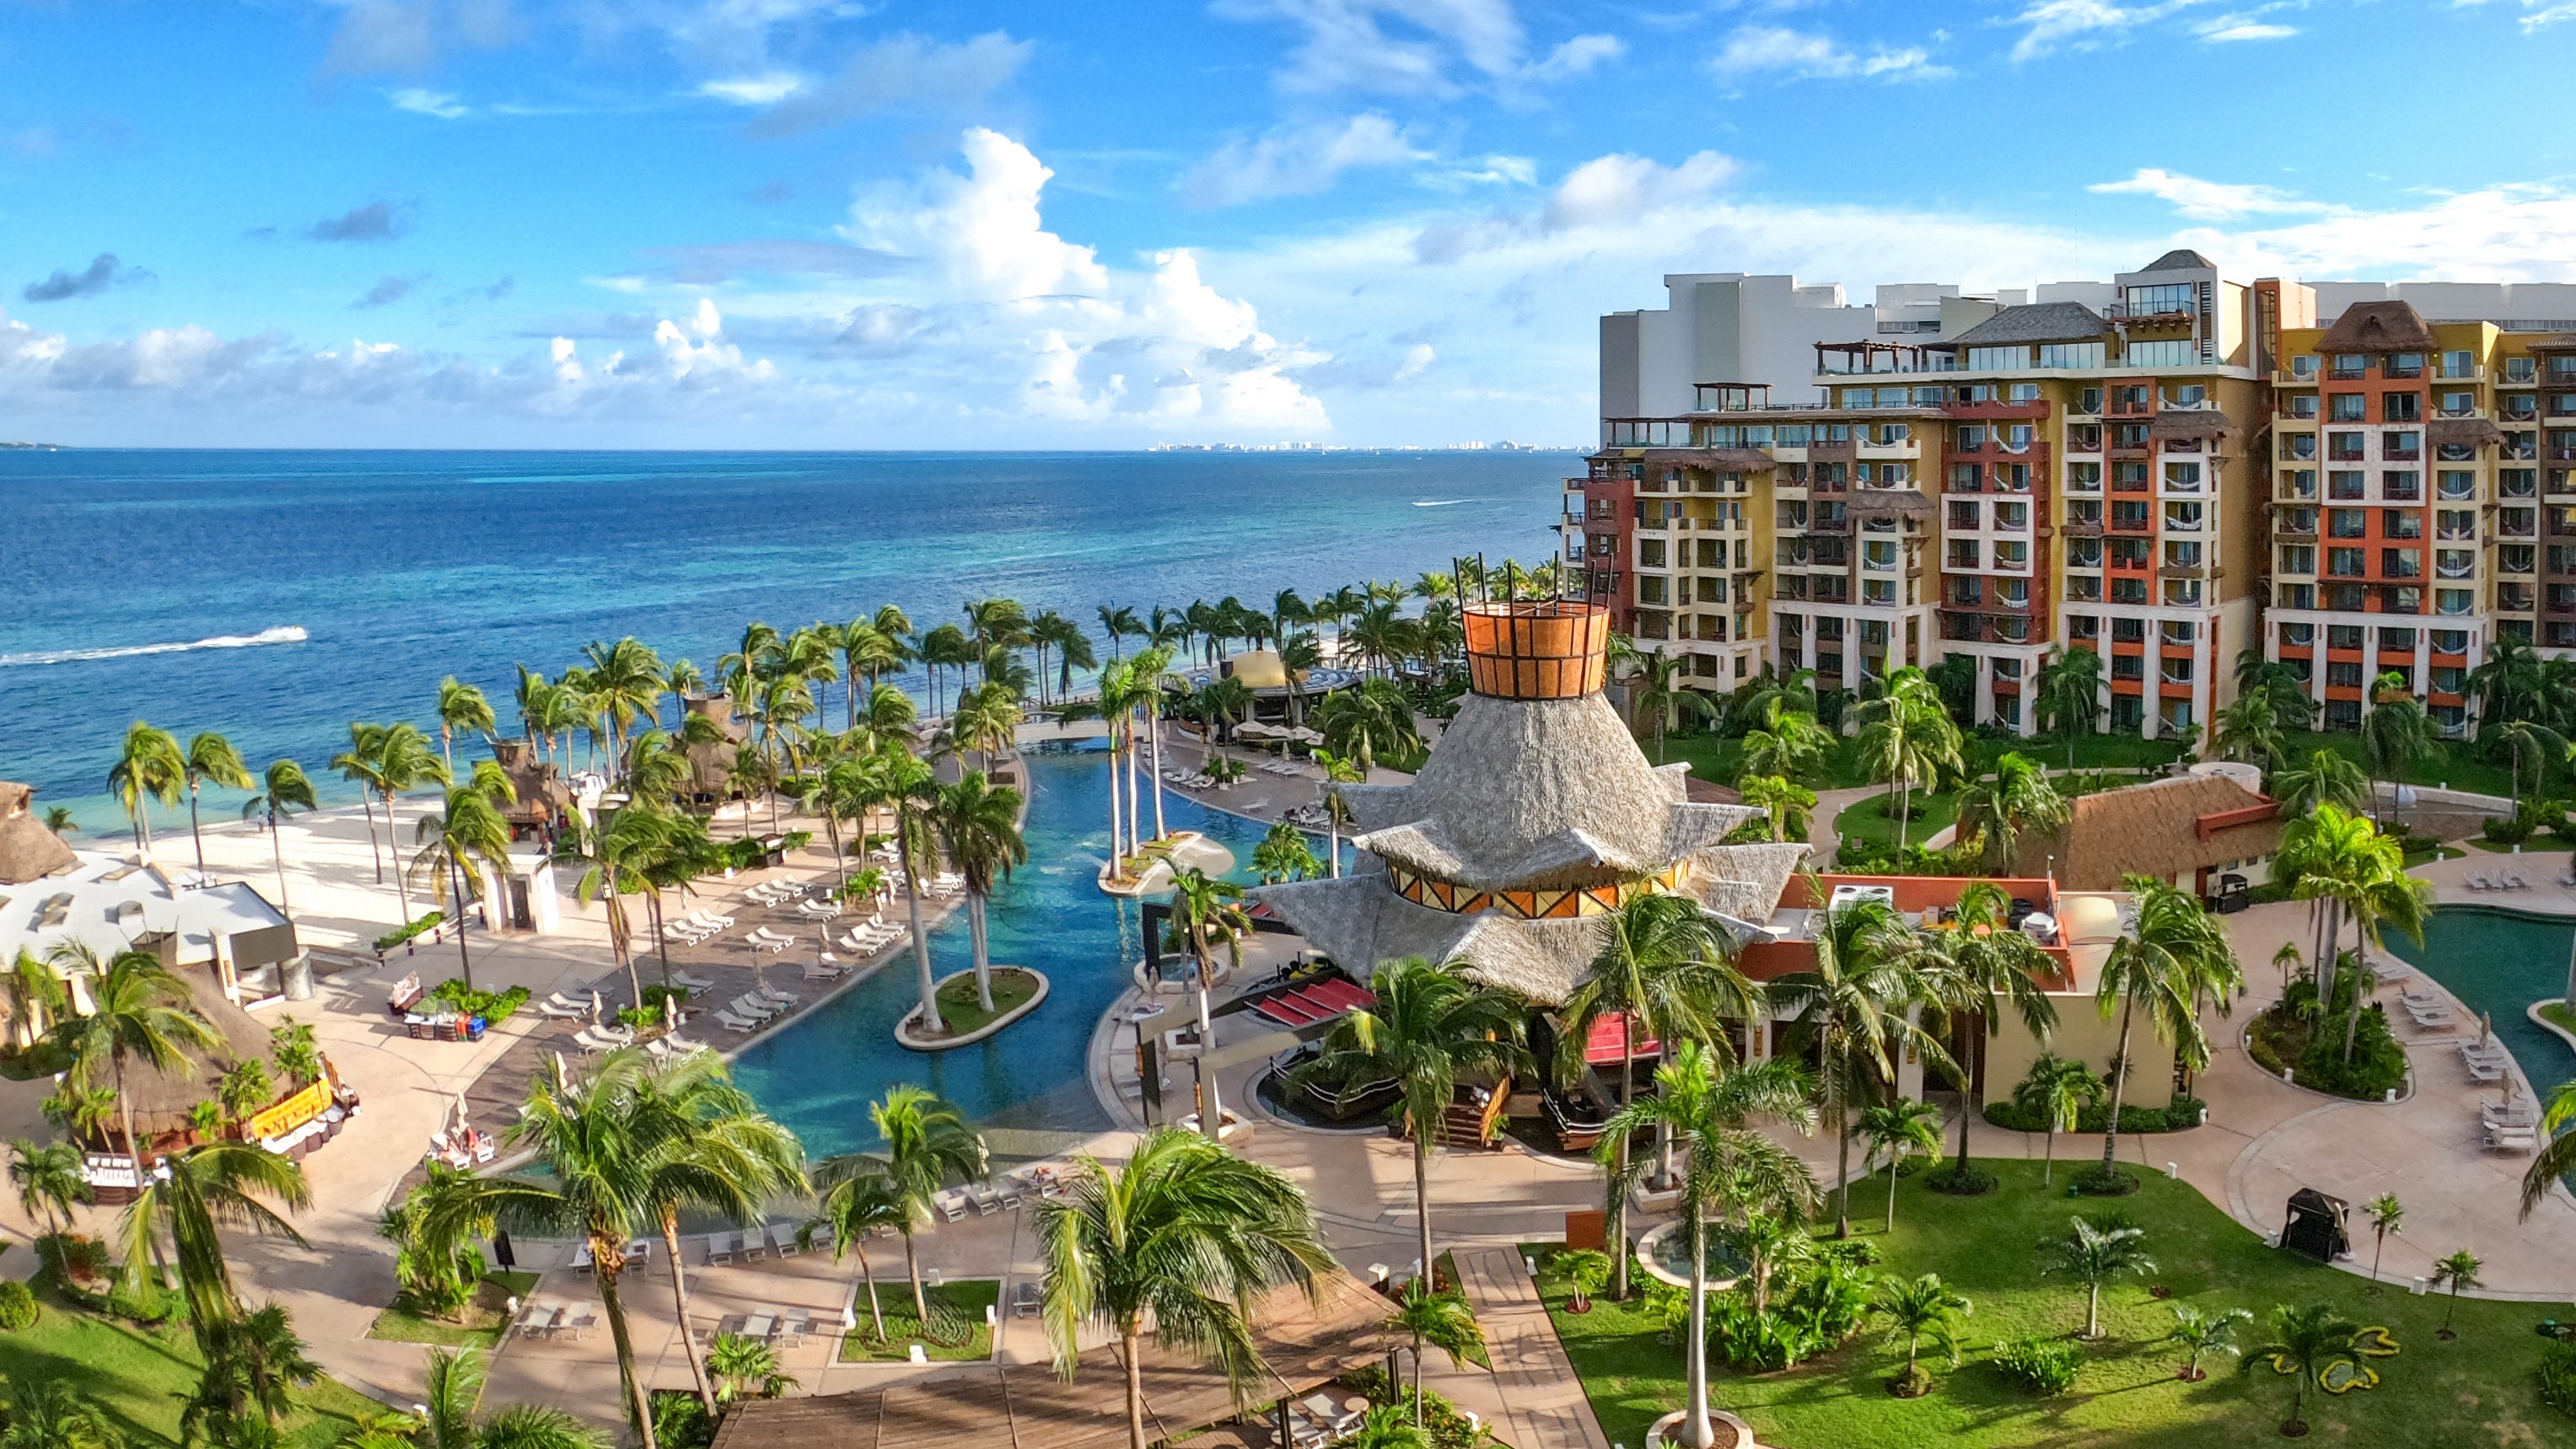 The 10 best all-inclusive resorts where kids stay free